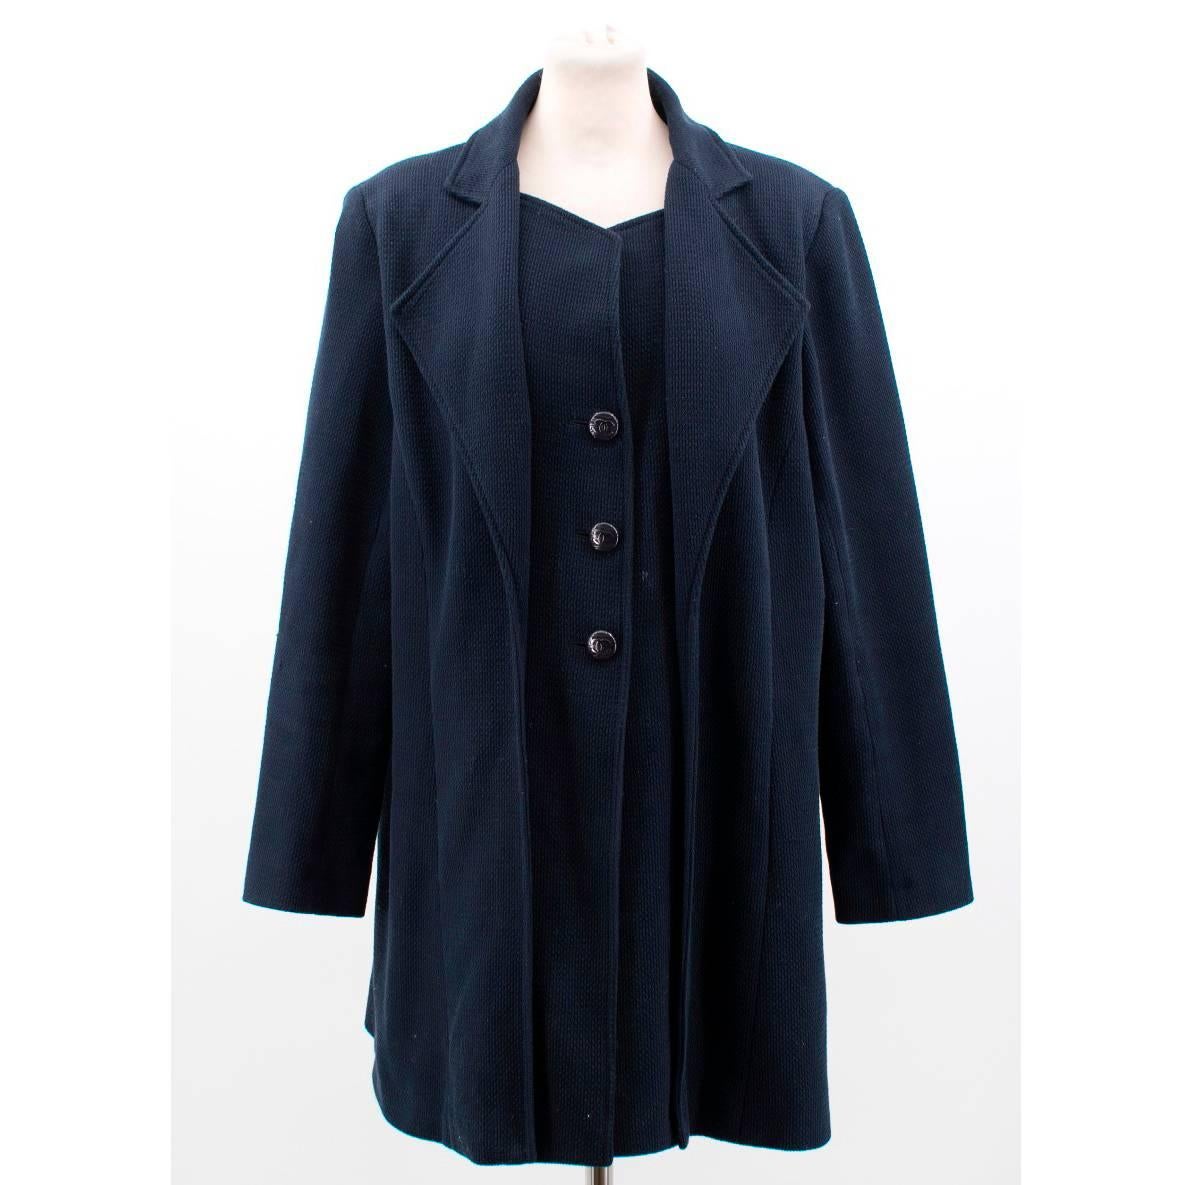 Chanel Navy Coat - Size Large In Excellent Condition For Sale In London, GB